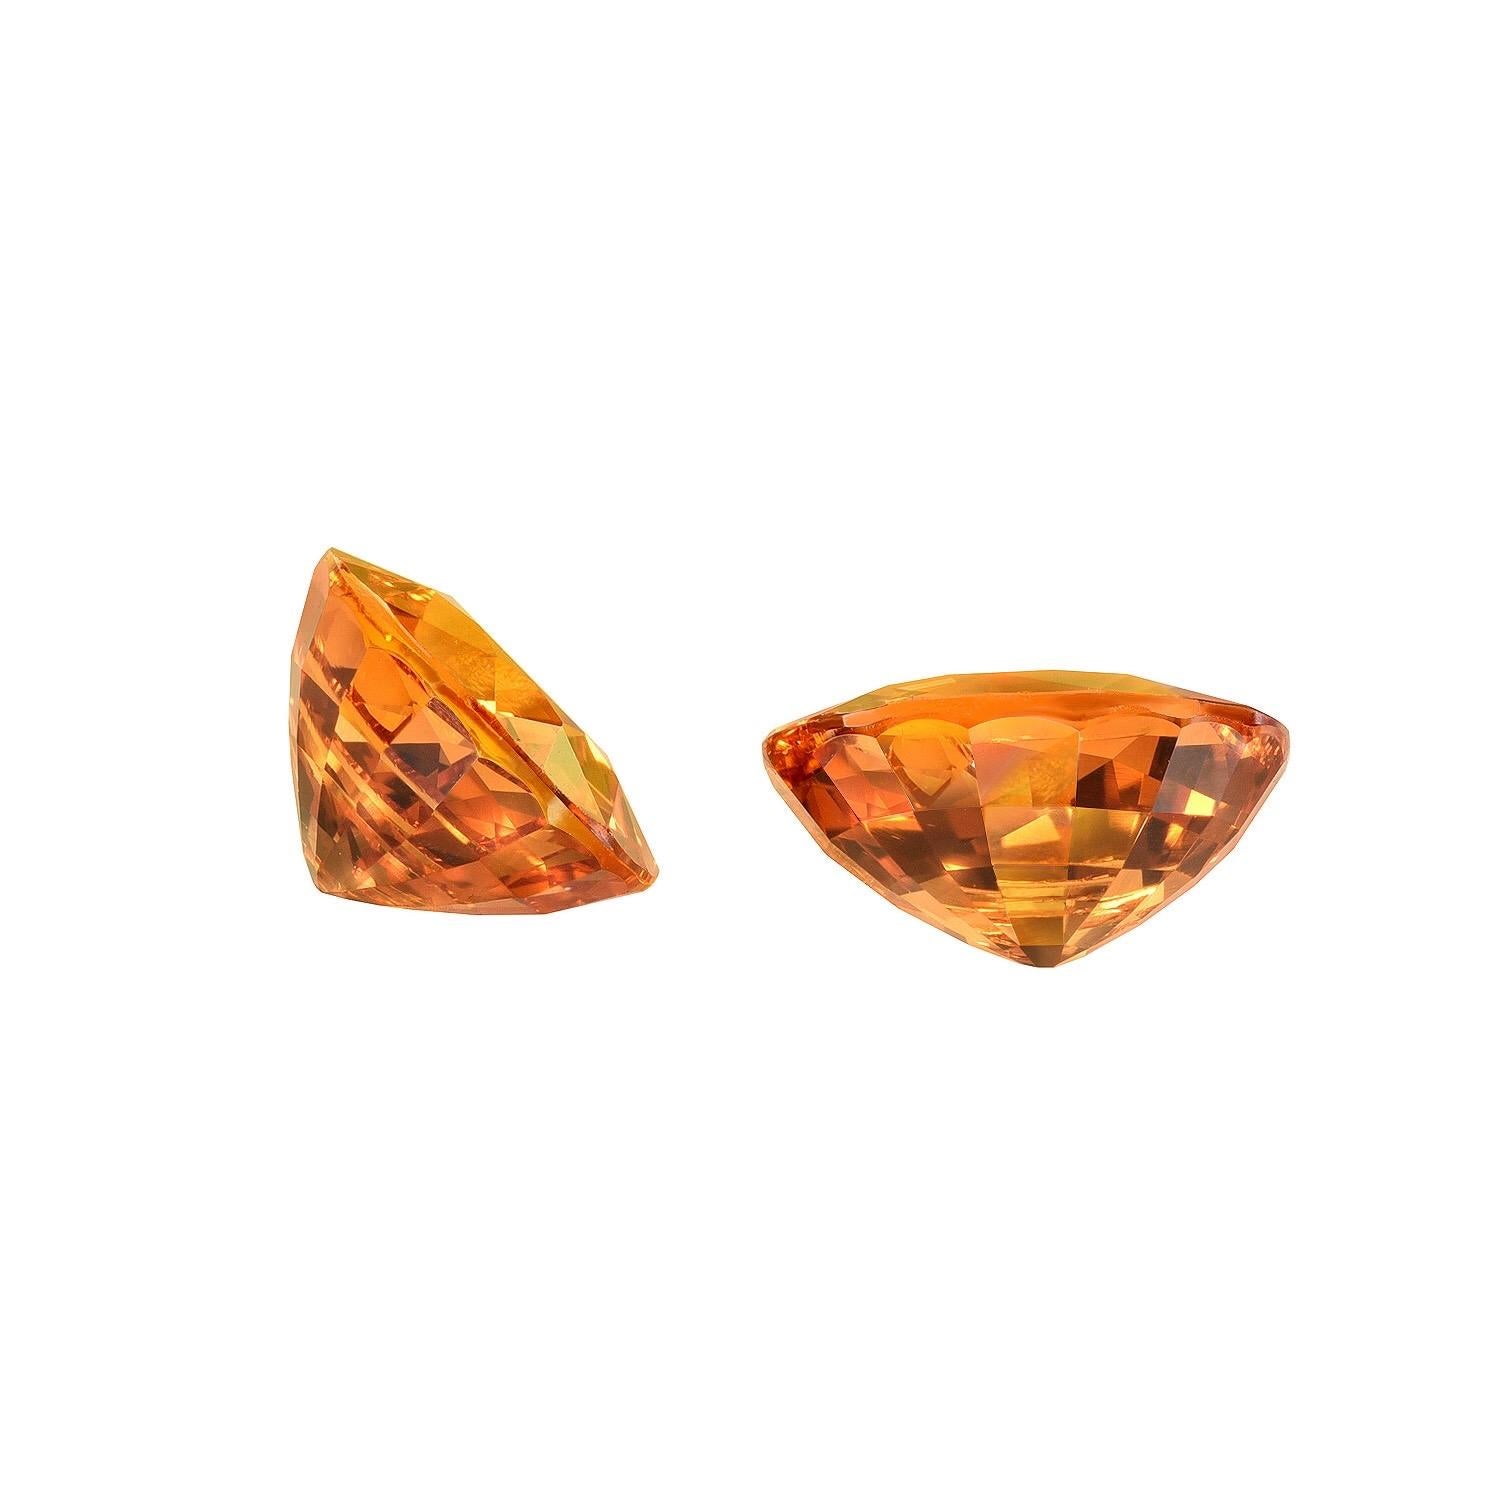 Superb pair of Mandarin Garnet oval gems, weighing a total of 3.78 carats, offered loose to a fine gemstone lover.
Returns are accepted and paid by us within 7 days of delivery.
We offer supreme custom jewelry work upon request. Please contact us